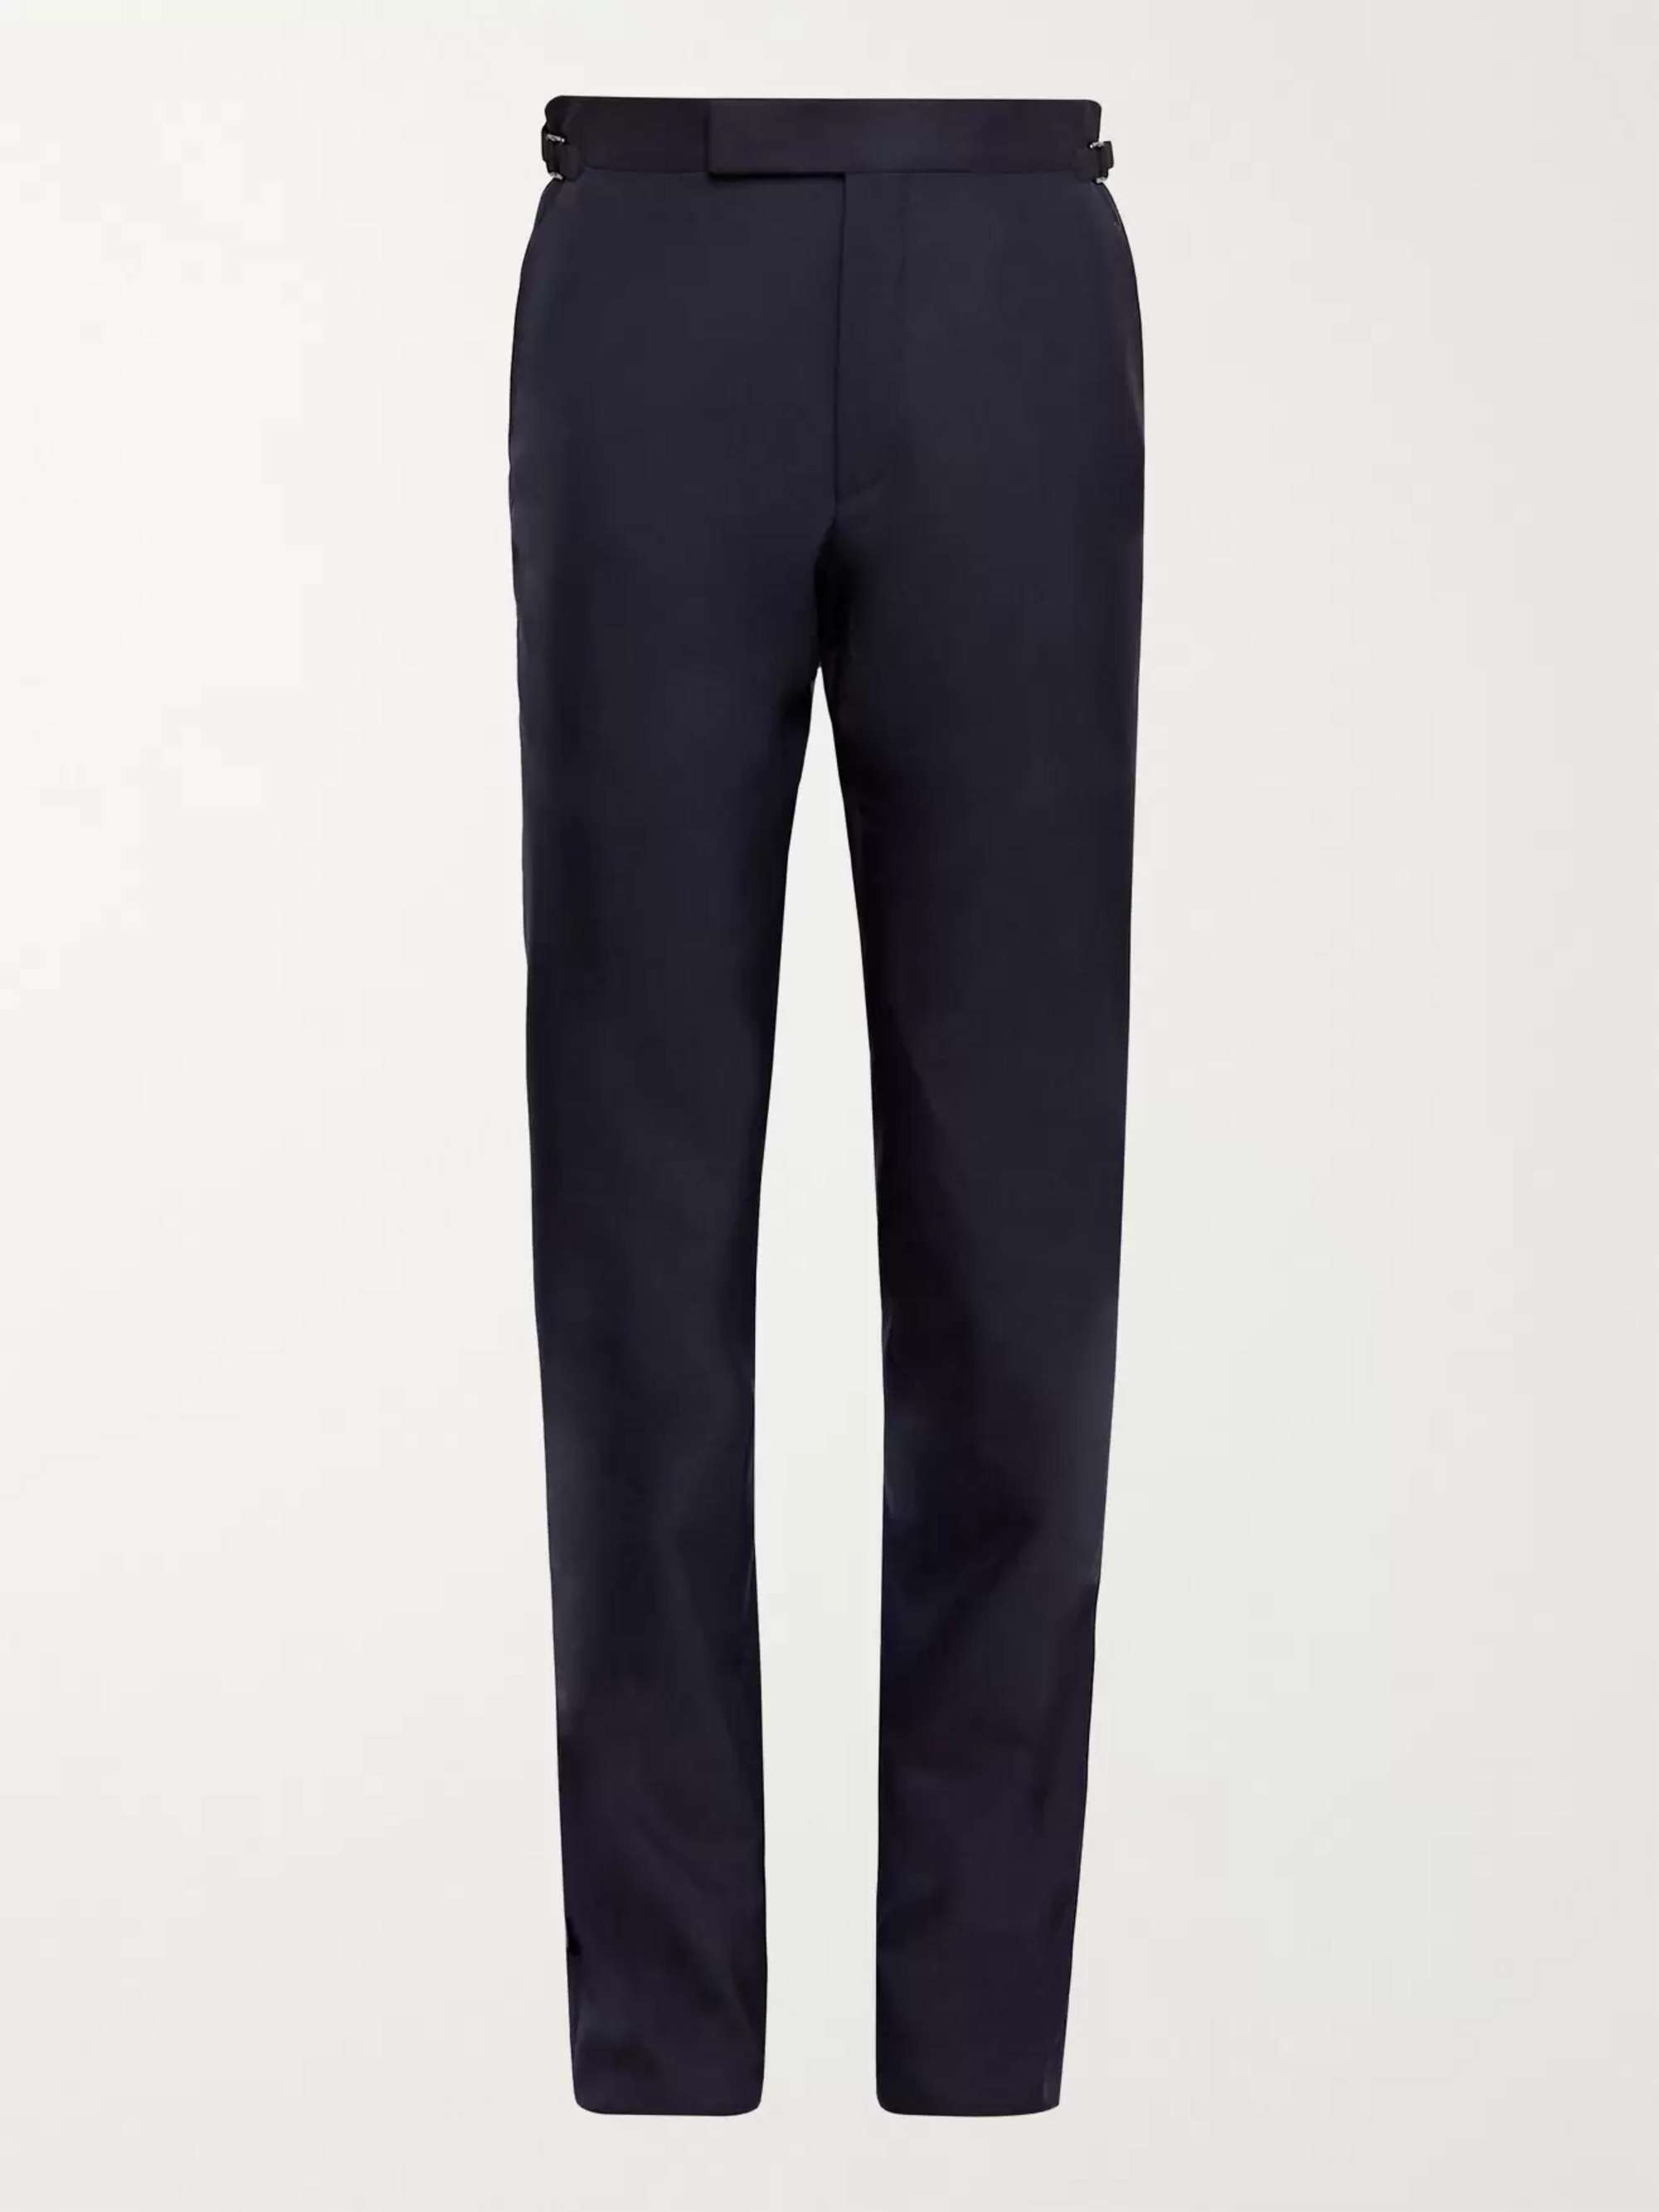 TOM FORD Slim-Fit Super 120s Wool Suit Trousers